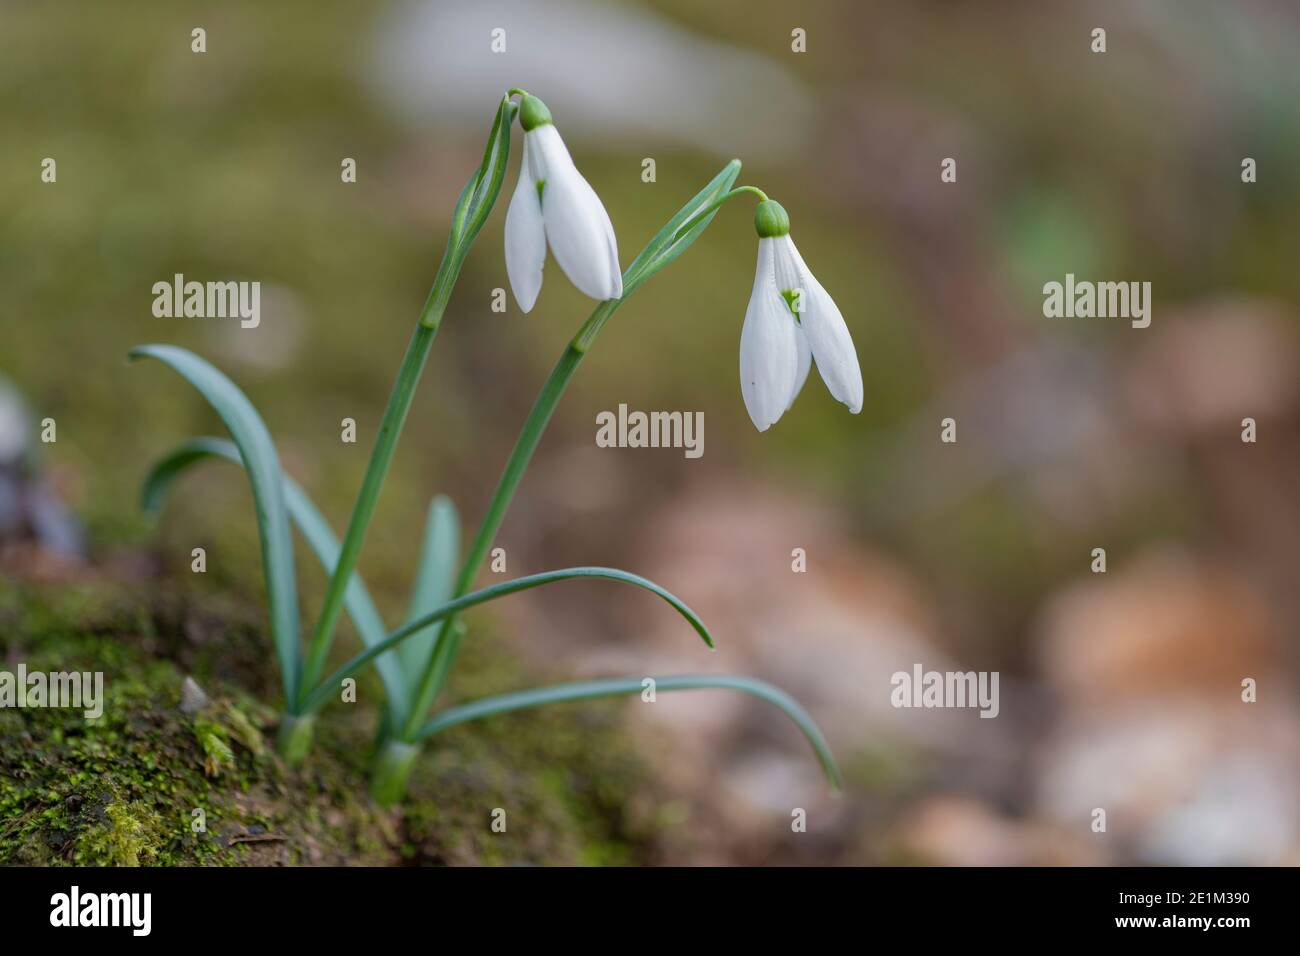 Common Snowdrop (Galanthus nivalis), two plants with flowers, Campania, Italy Stock Photo